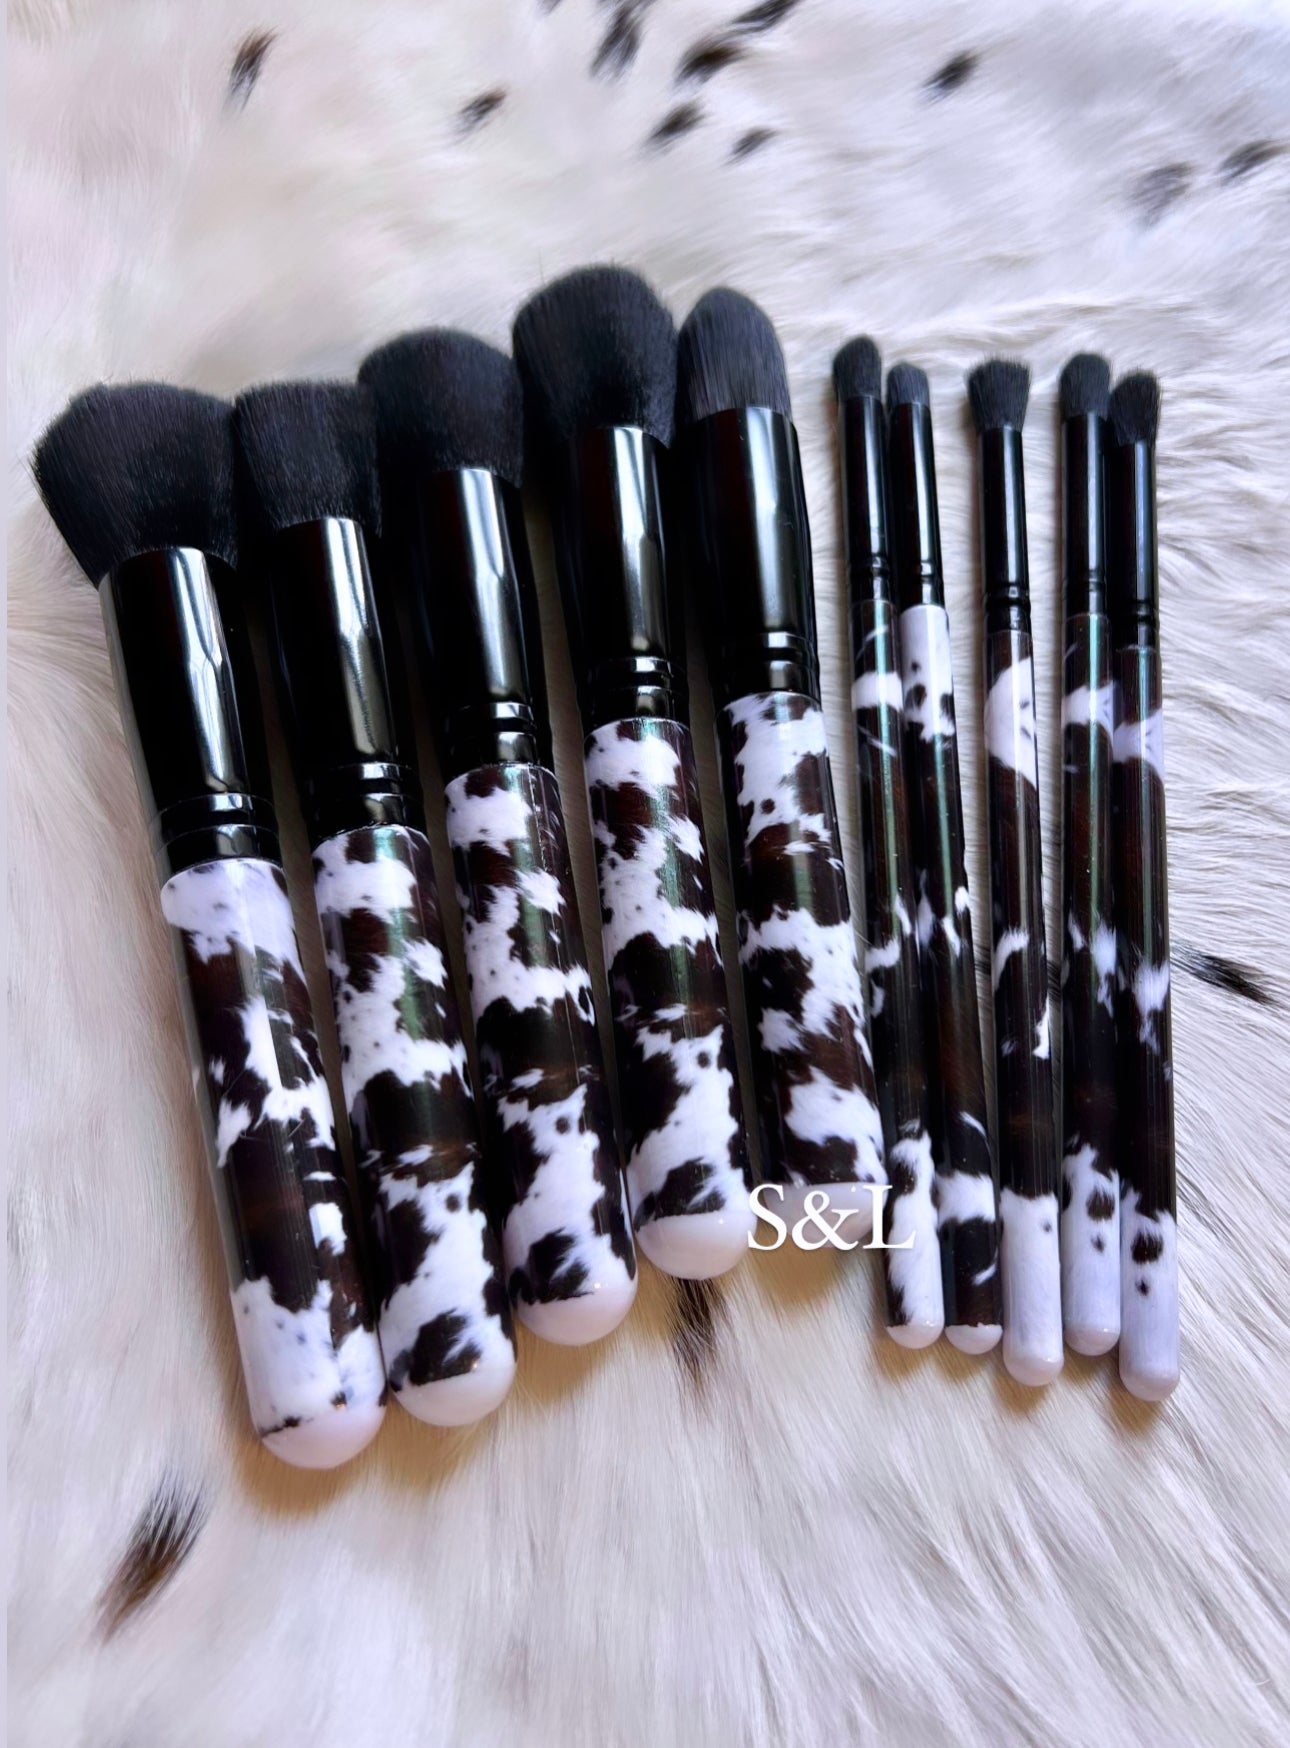 10pc Make Up Brush Set (preorder will arrive early November)